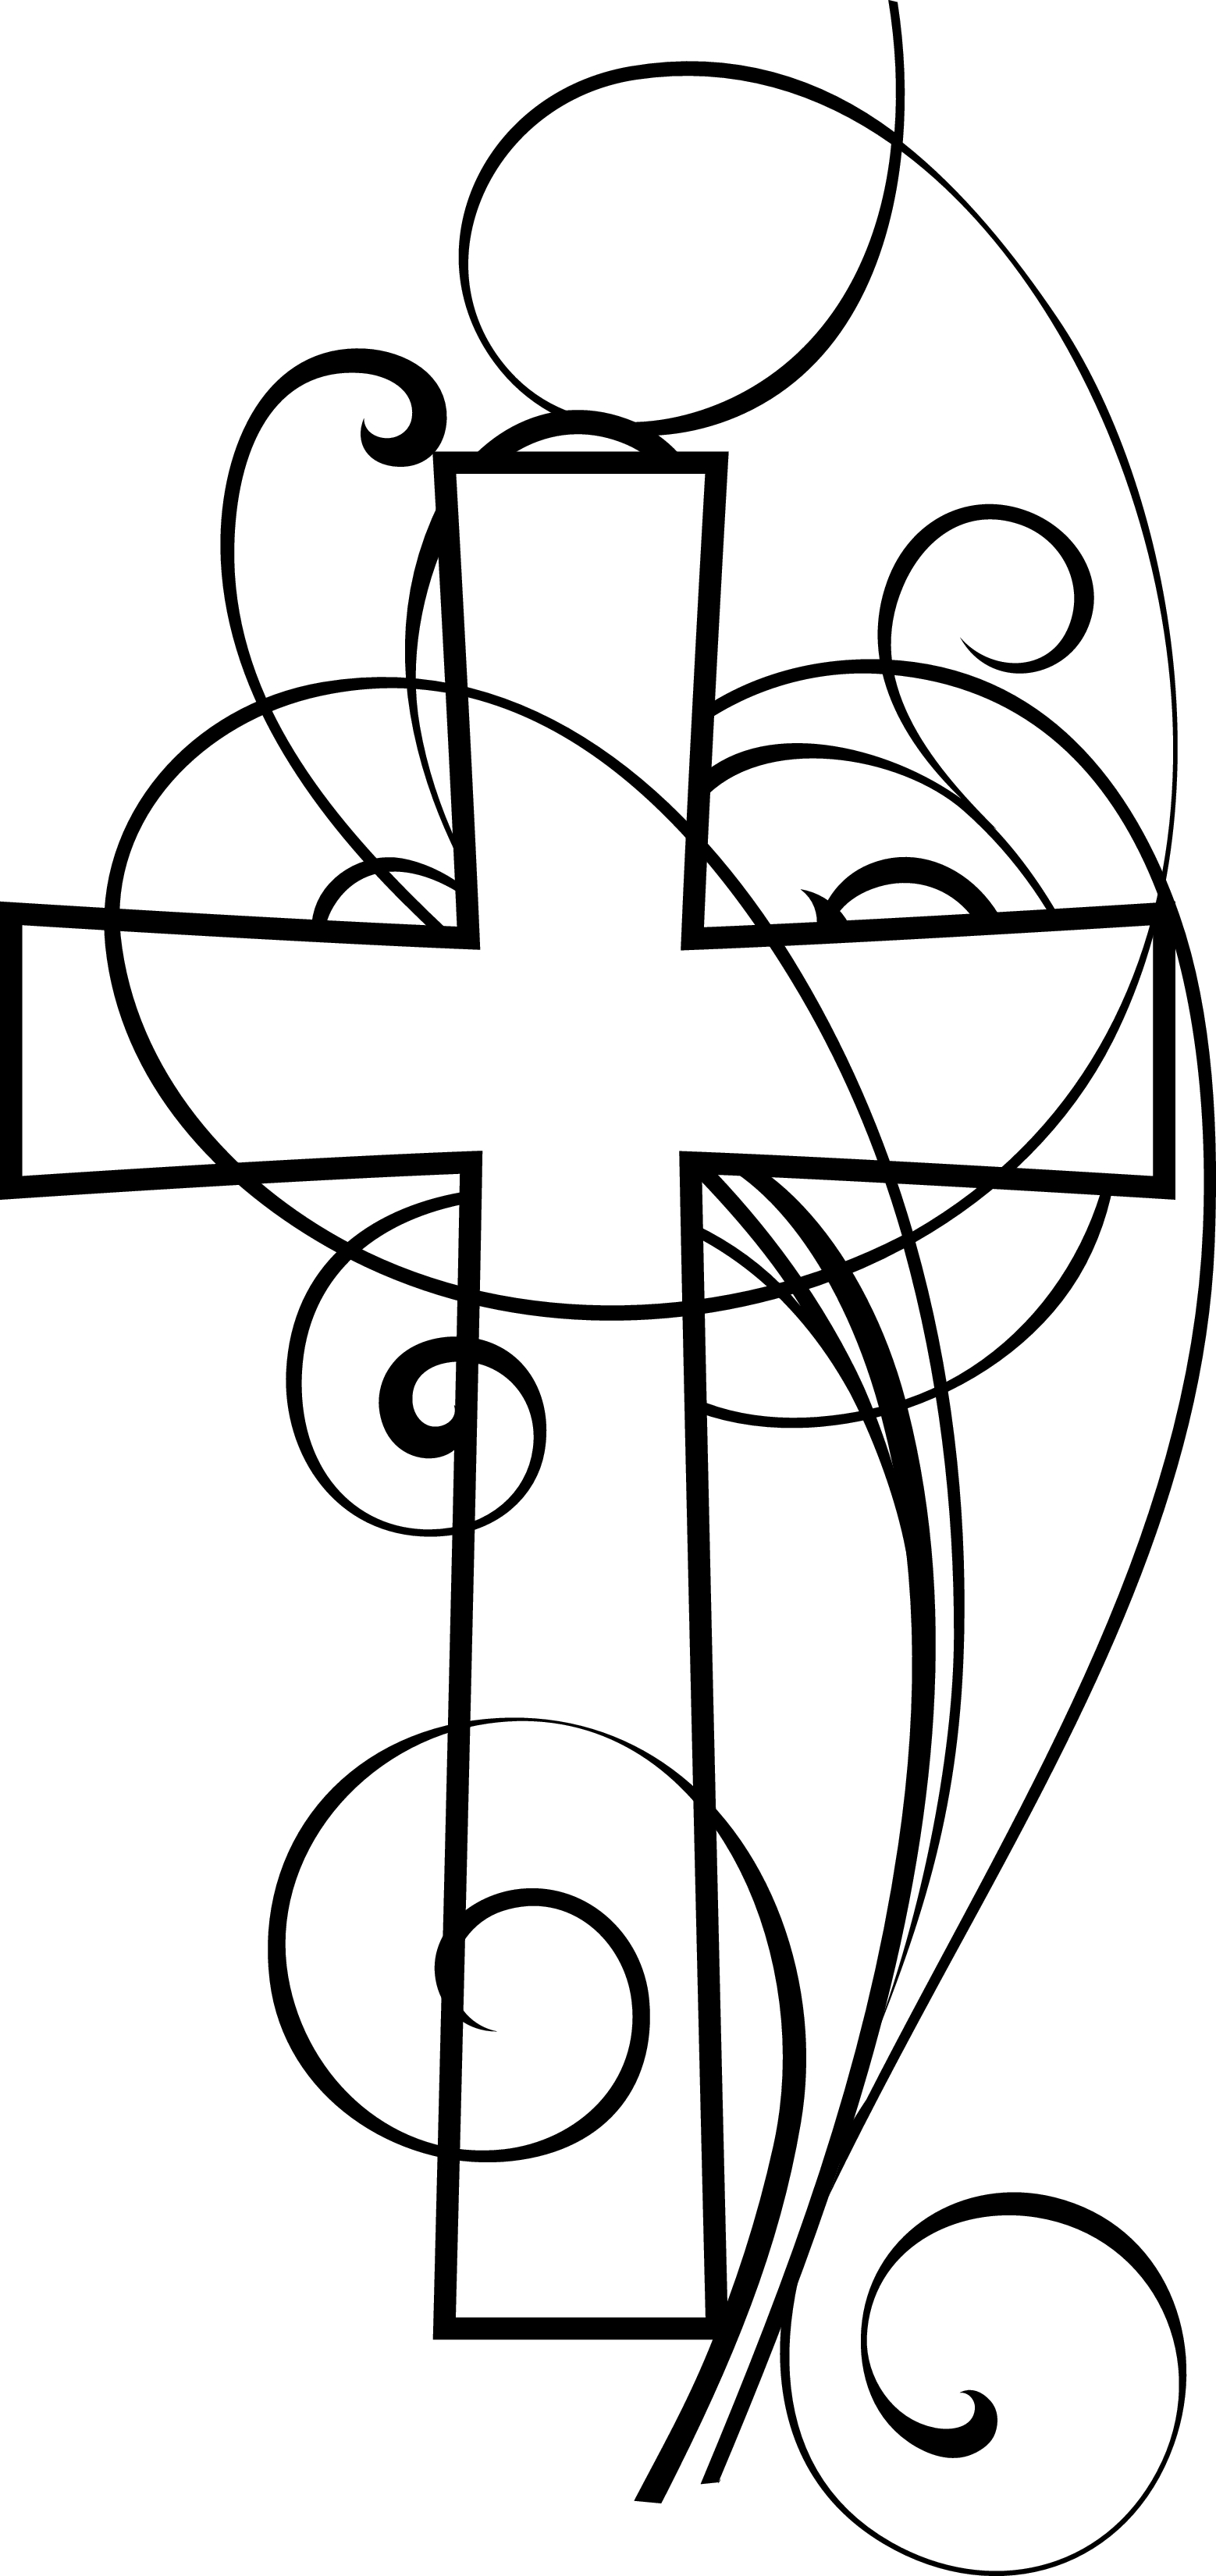 Free Christian Clip Art Black And White - Cliparts.co